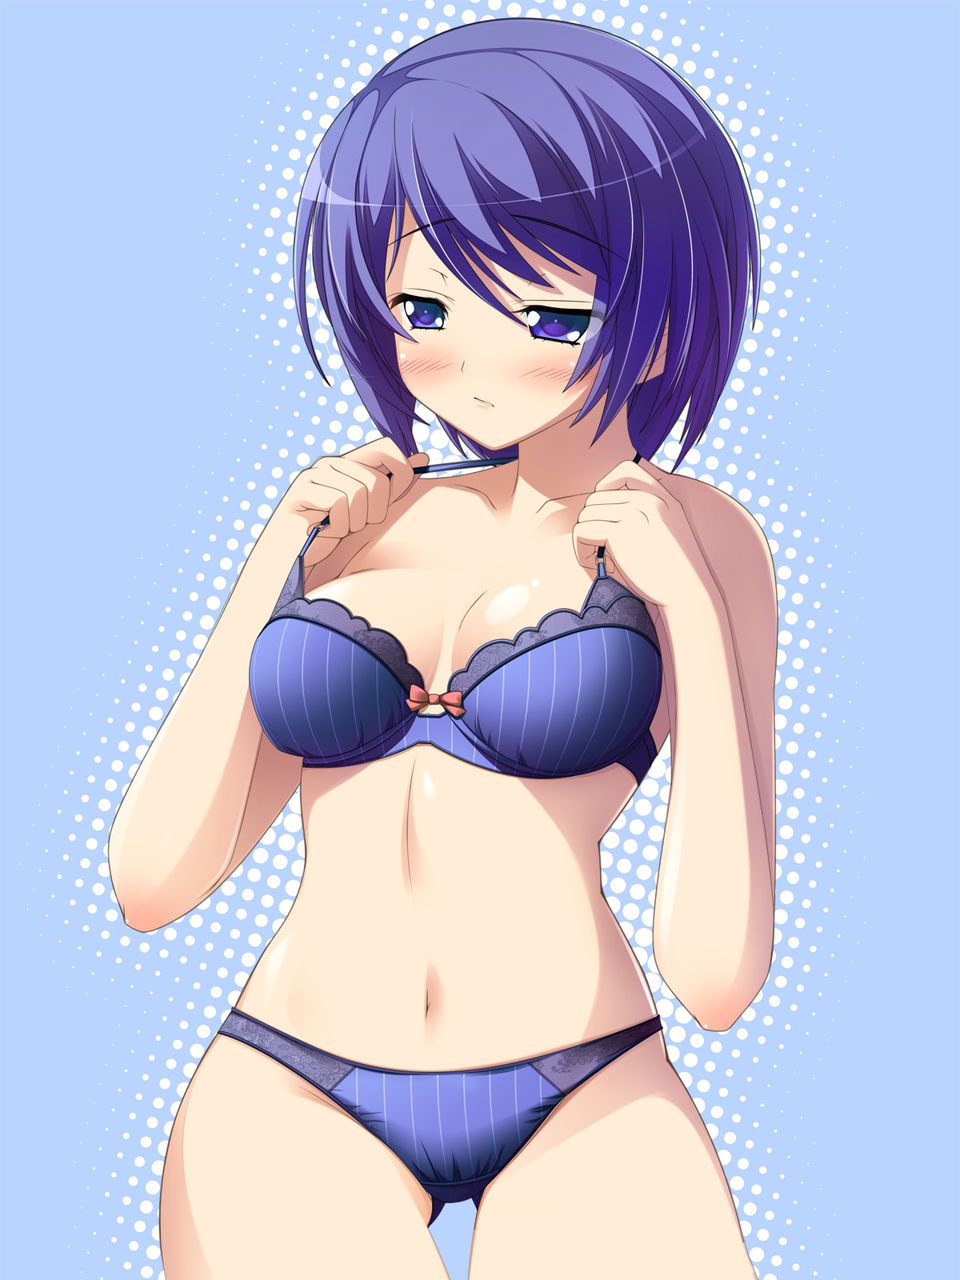 【2D】Summary of images of girls in underwear 75 photos 74